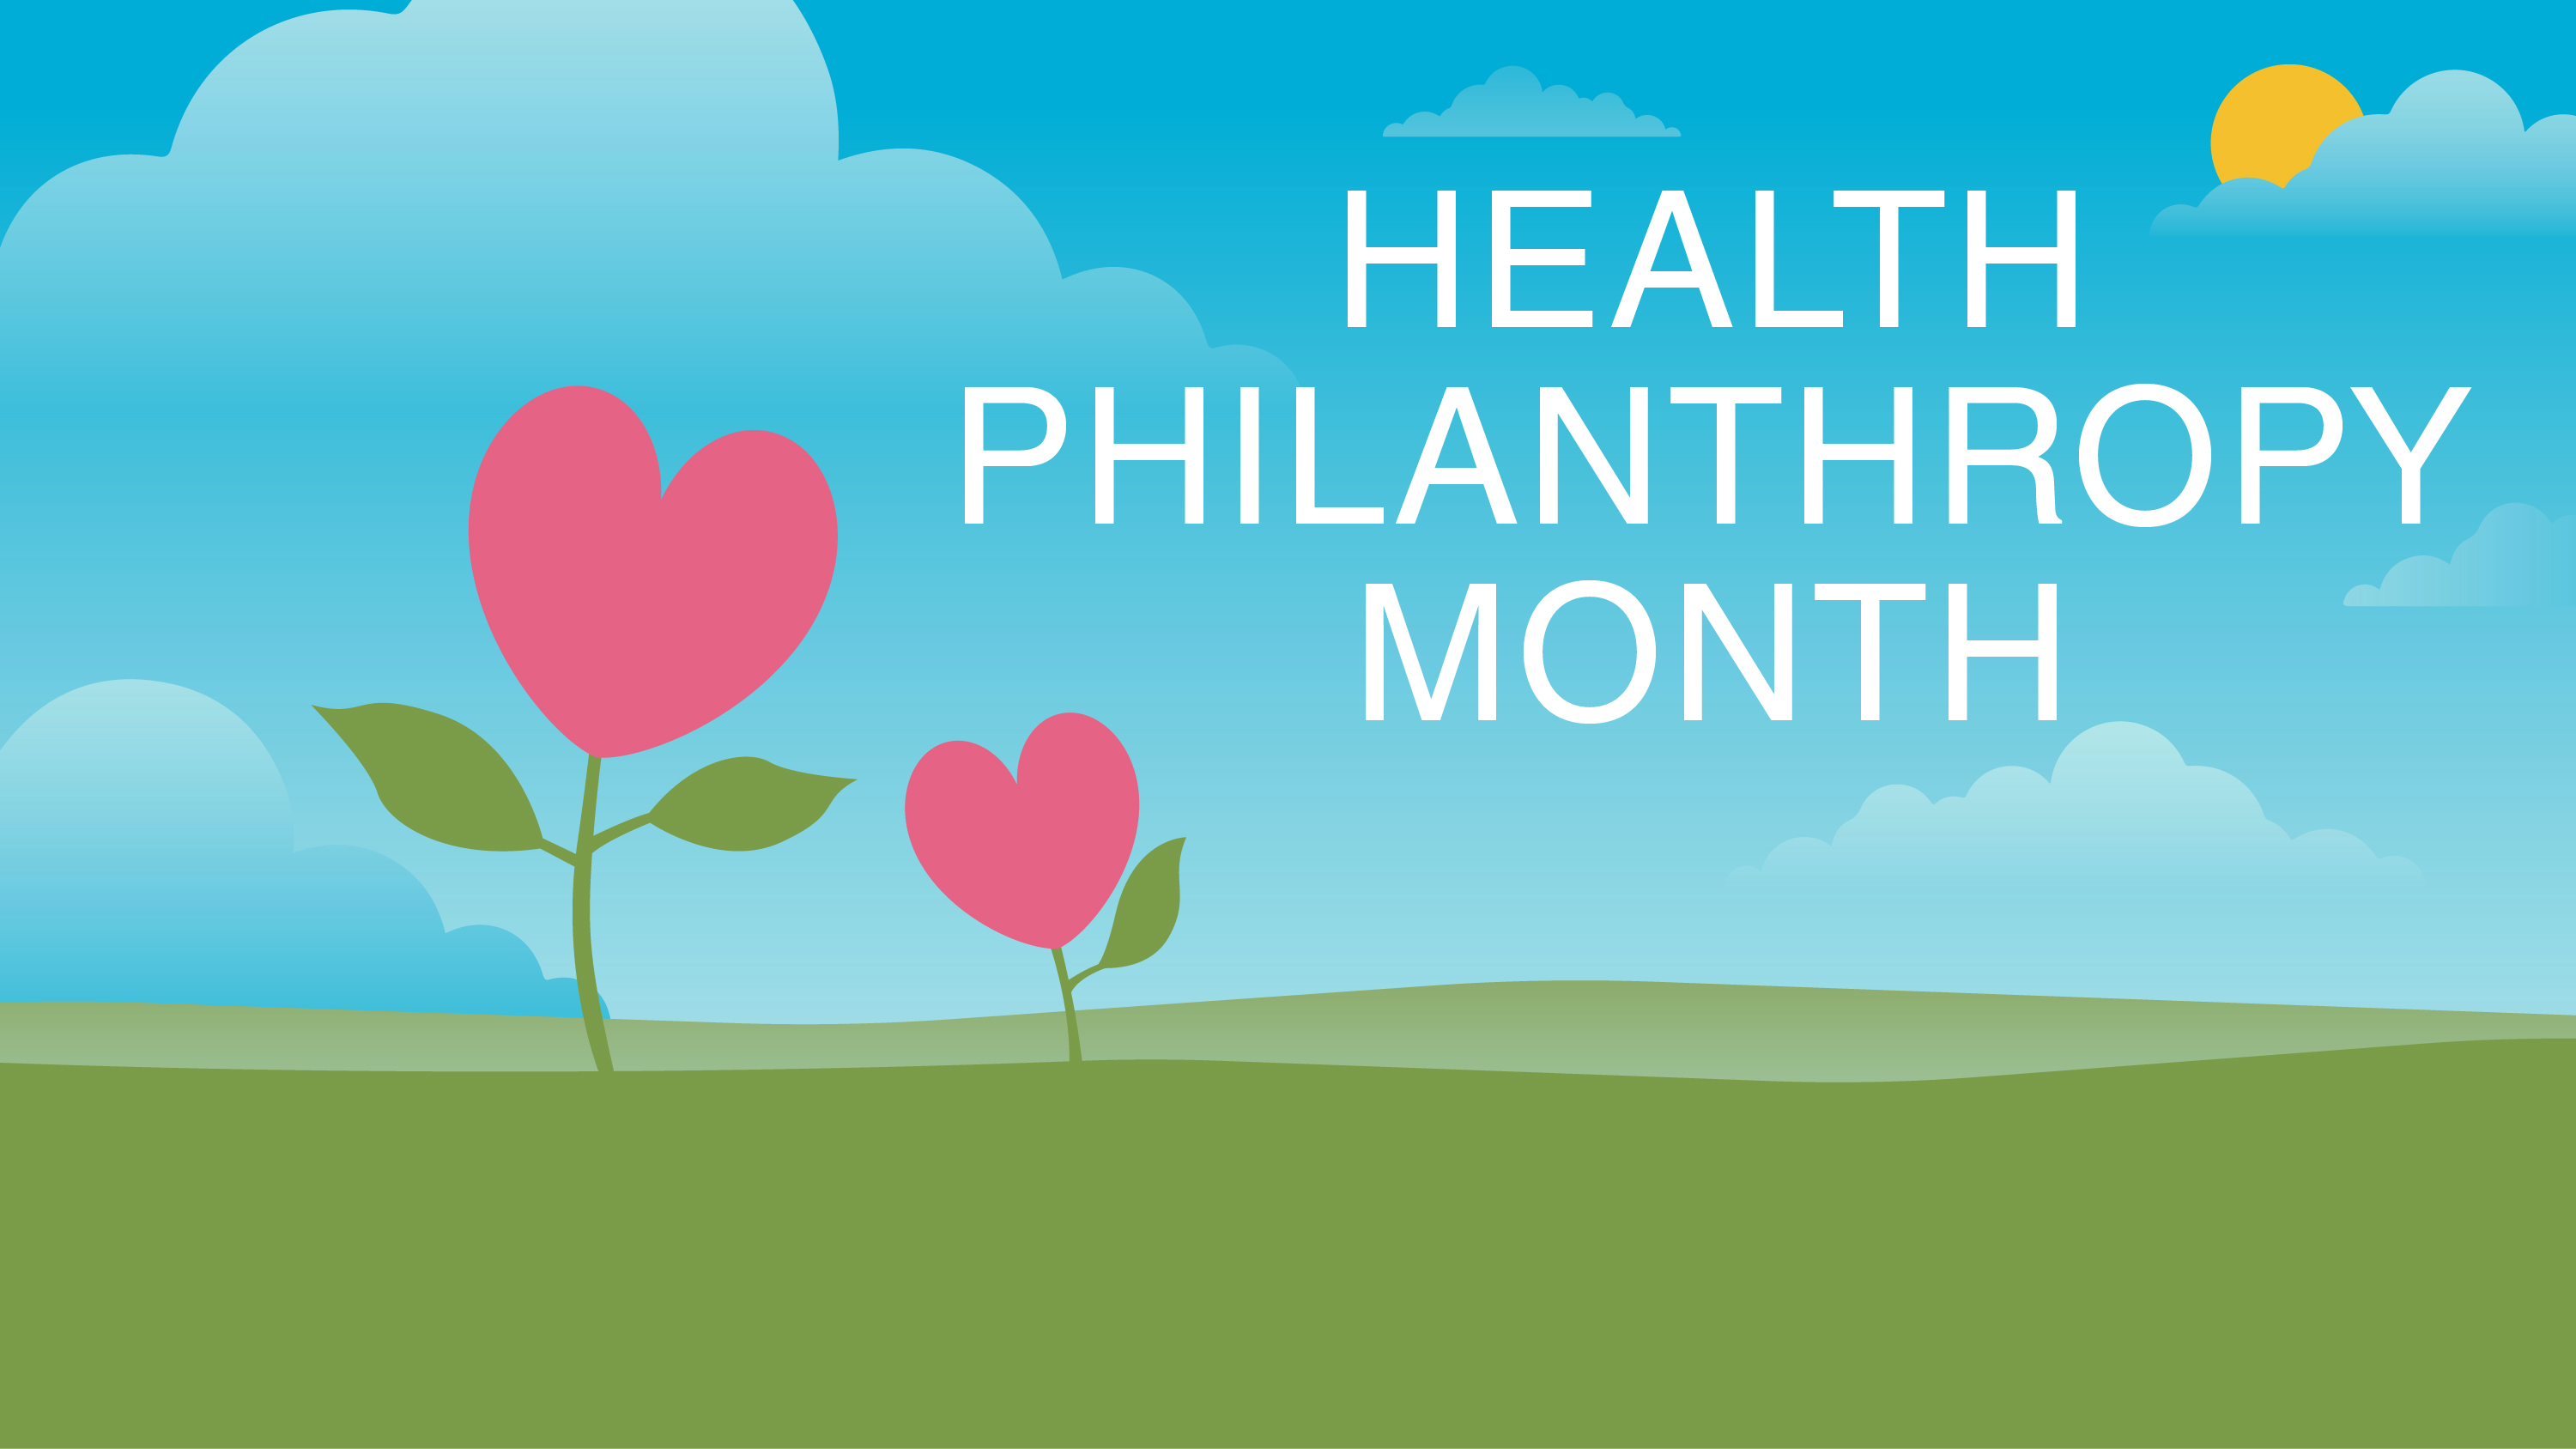 drawing of two heart-shaped flowers in a field with the words Health Philanthropy Month written on a blue sky